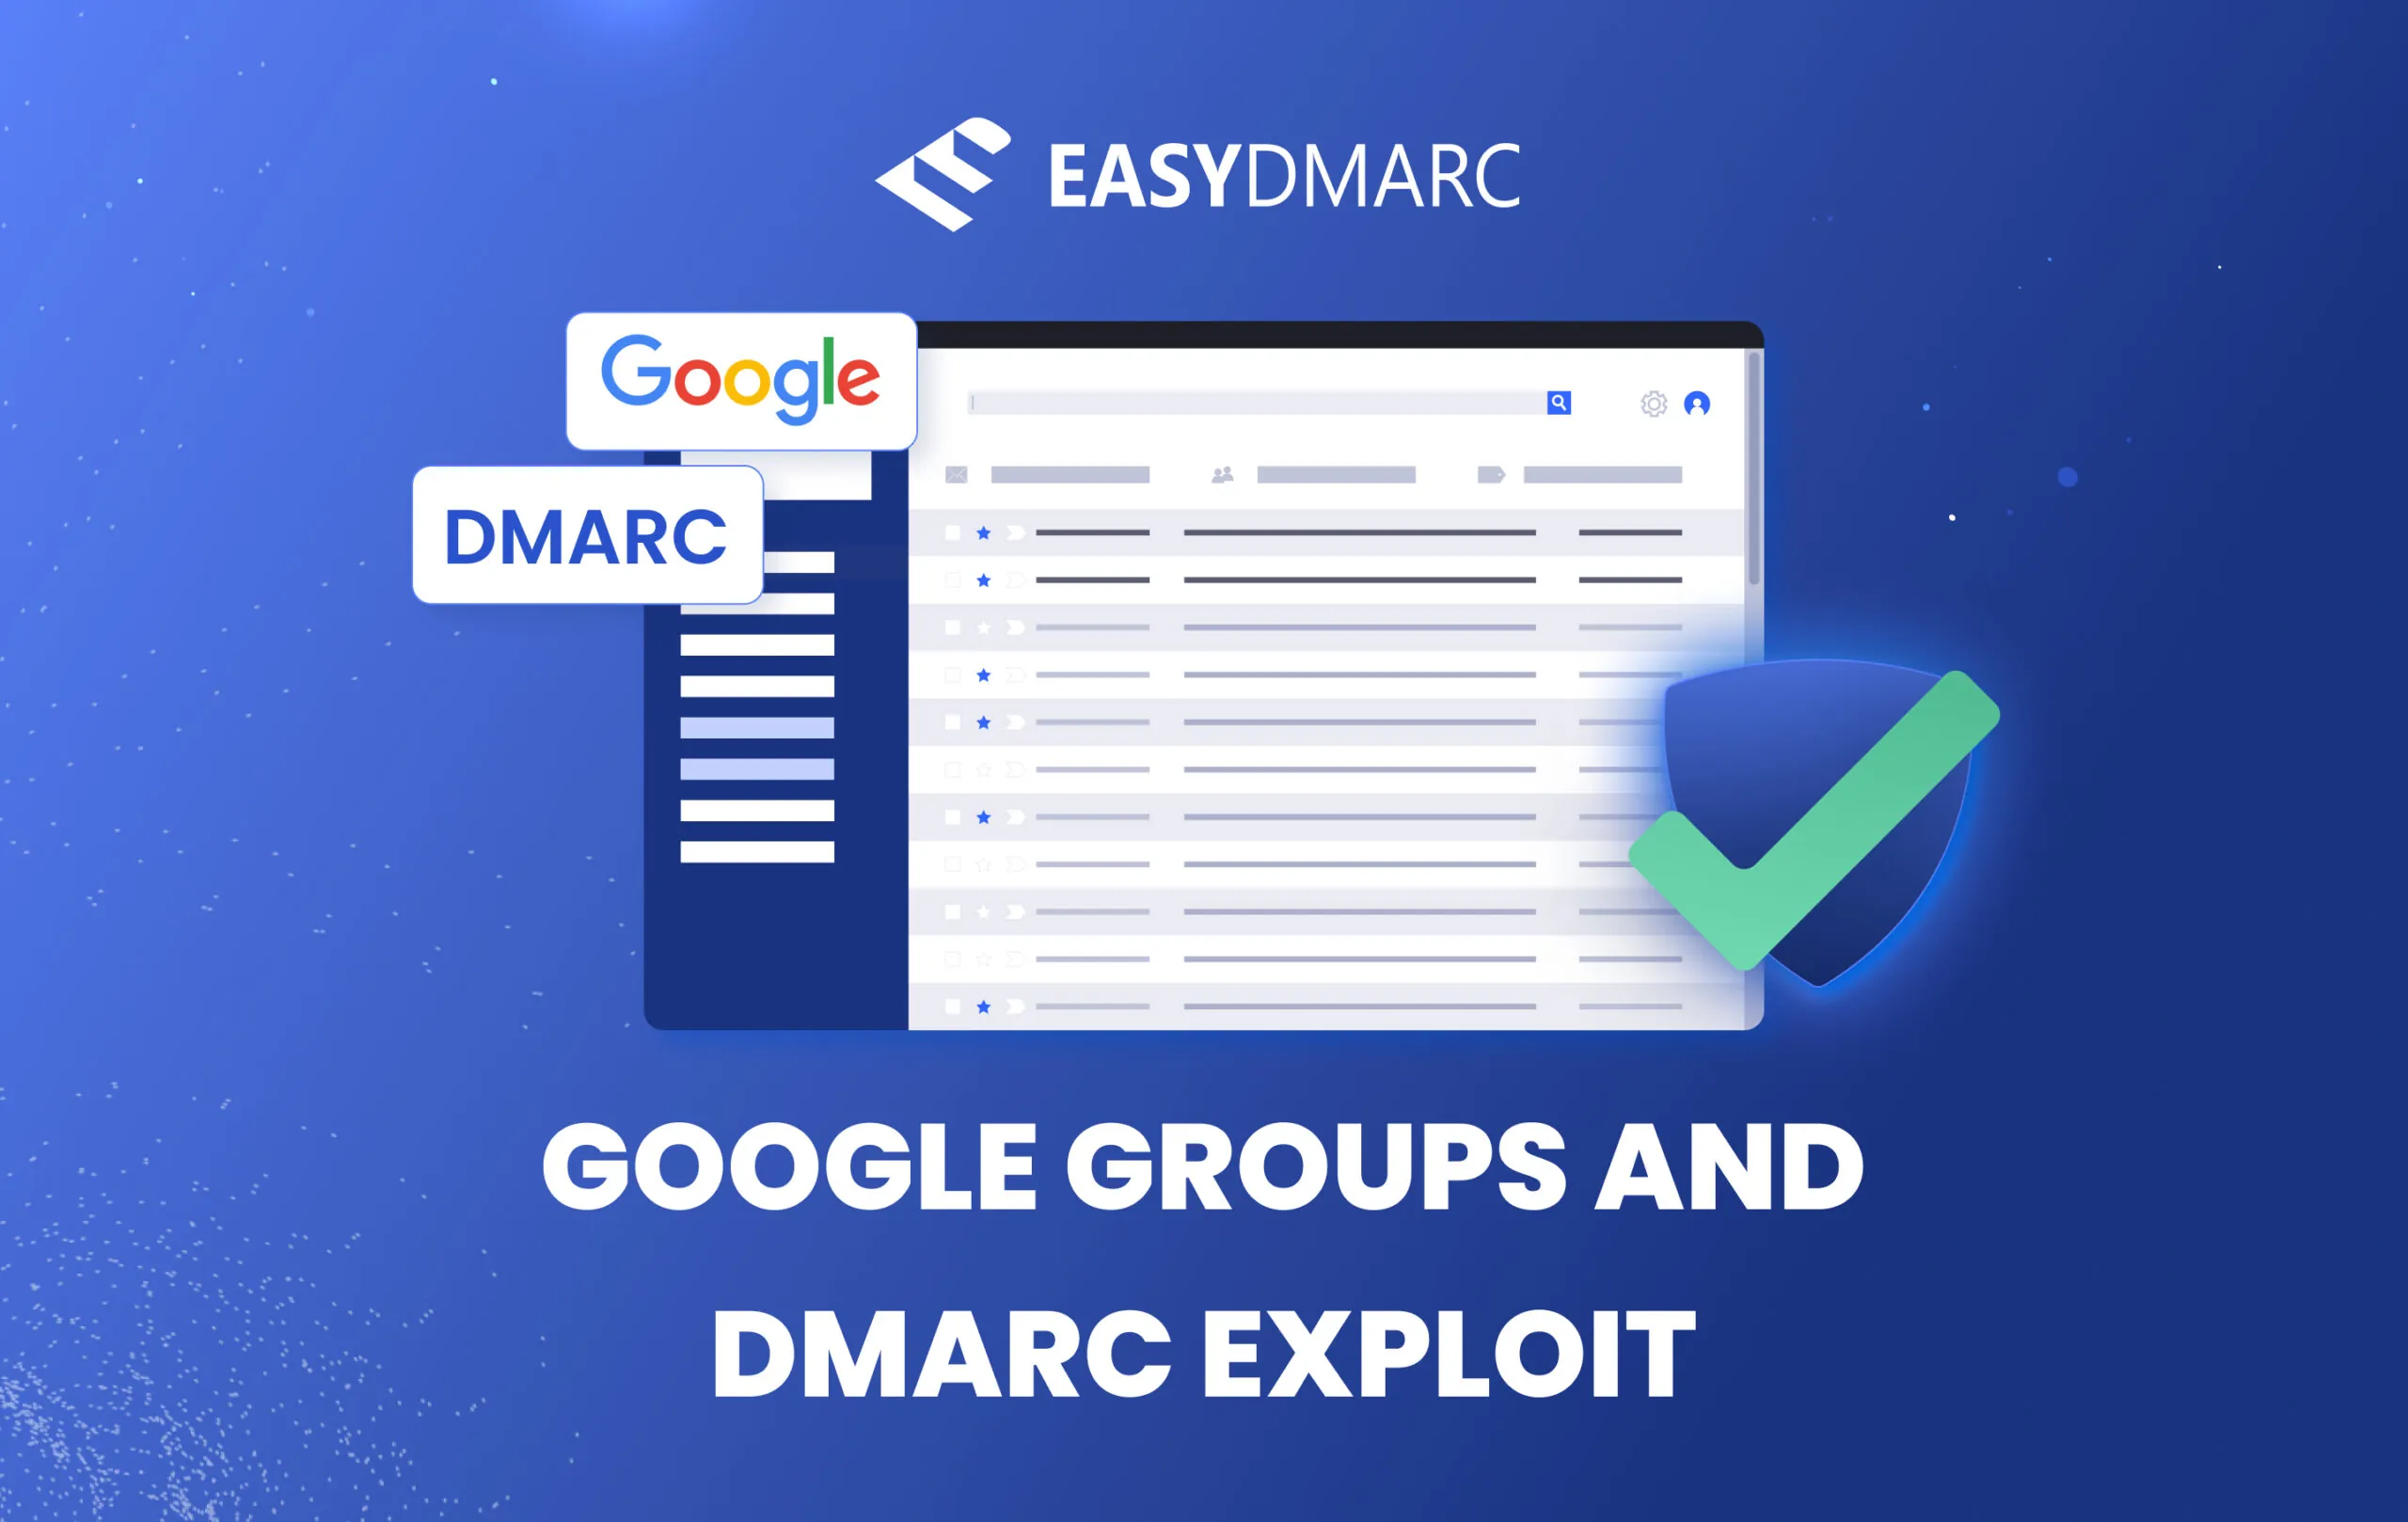 Google Groups and DMARC Exploit